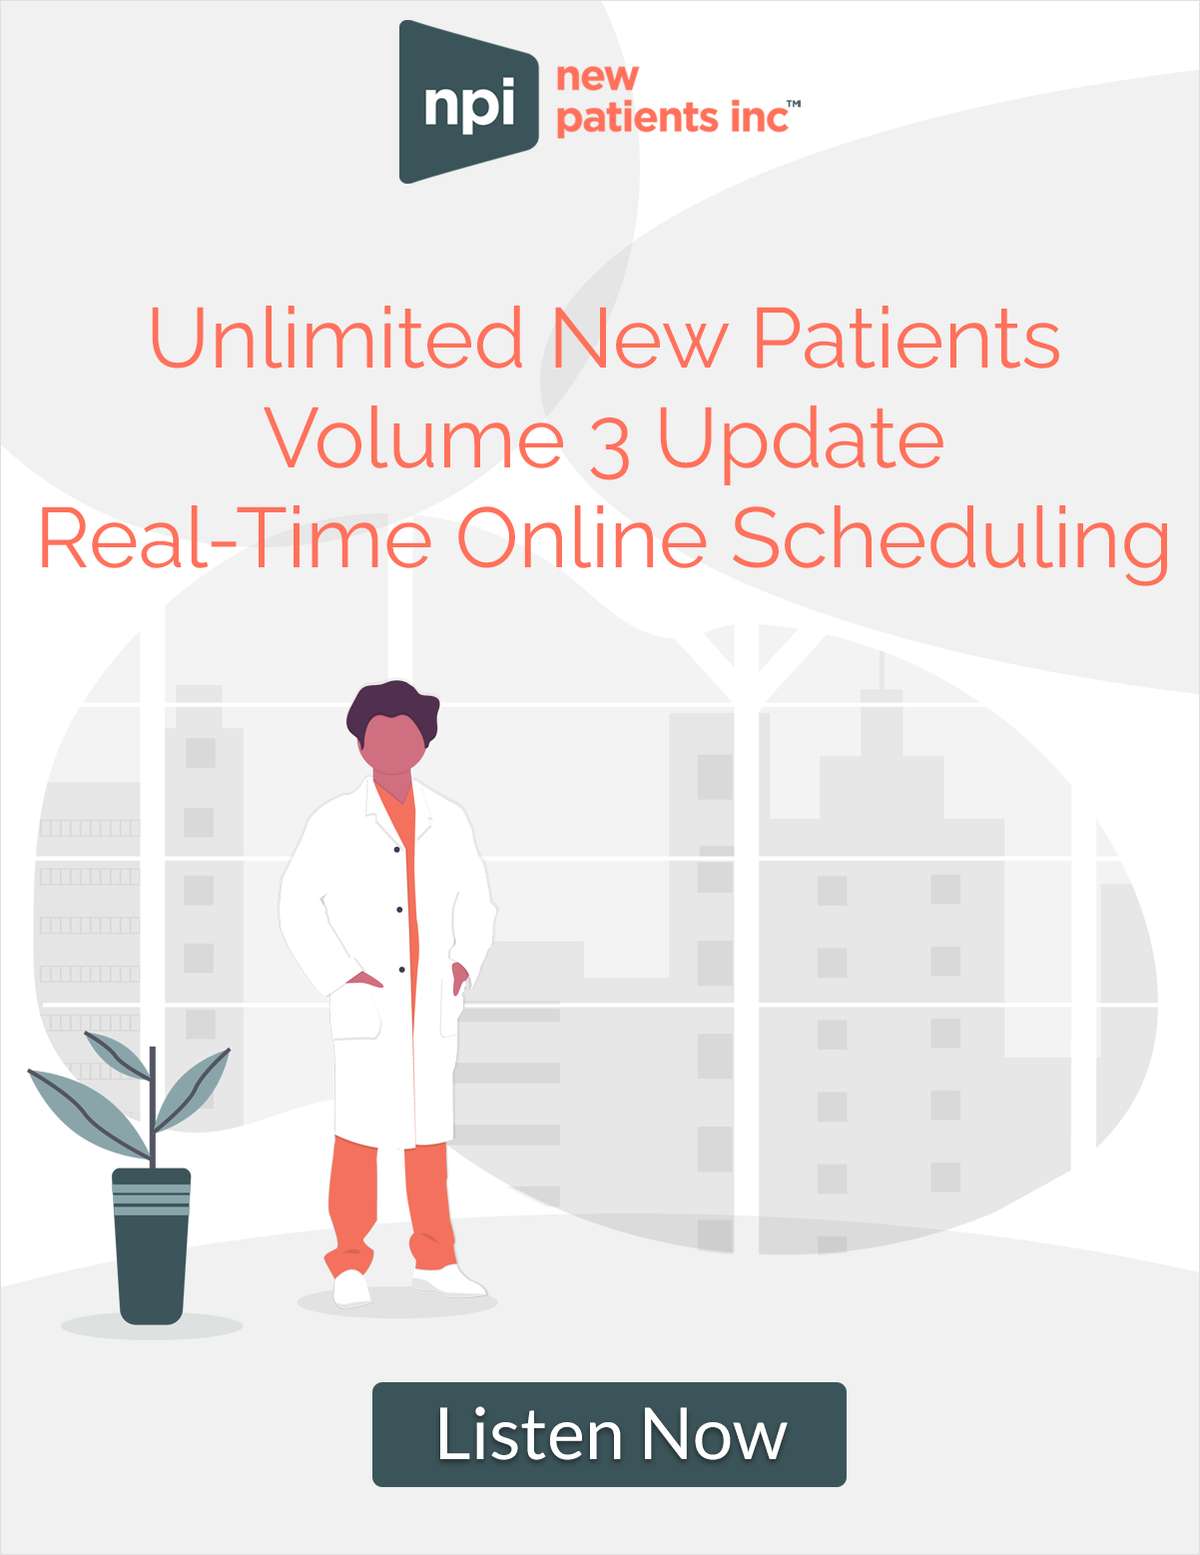 Real-Time Online Scheduling